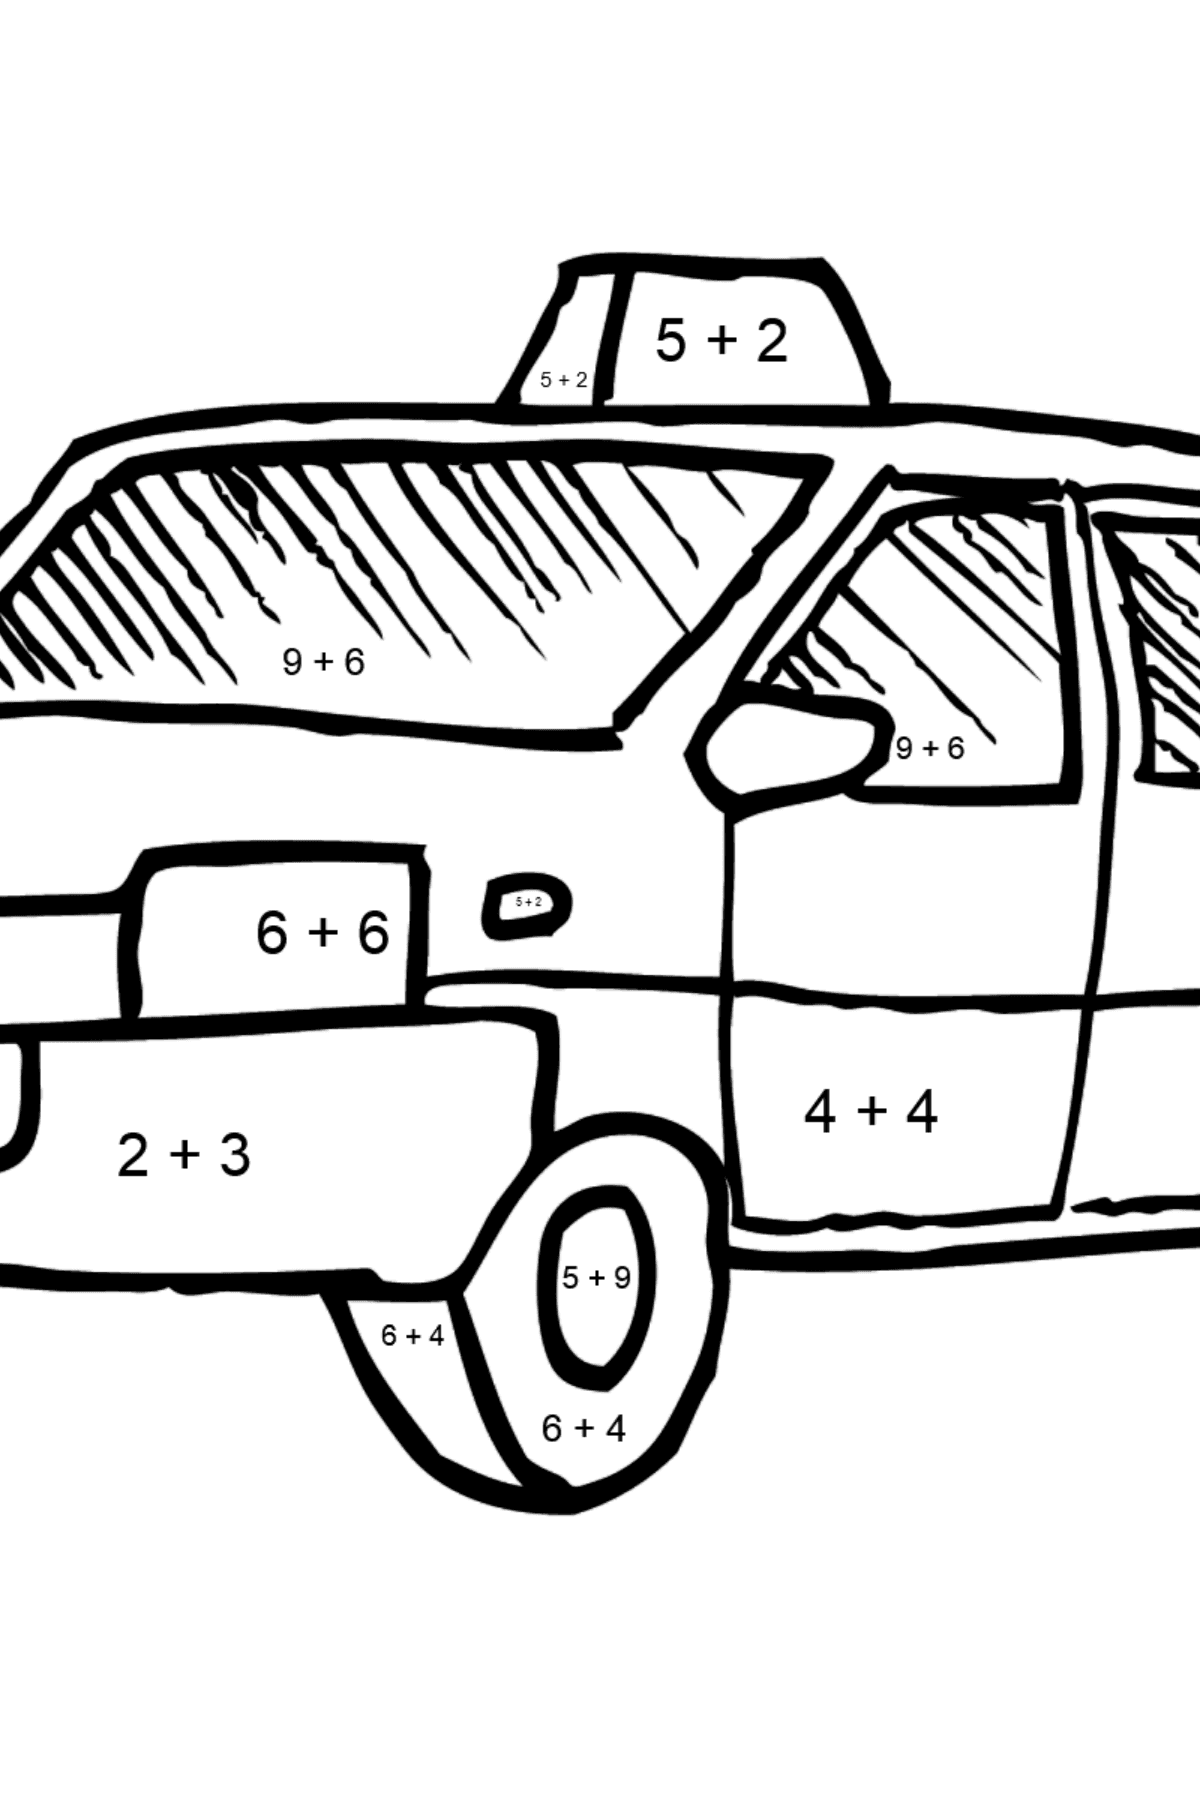 Coloring Page With A Taxi - Print Fo Free!